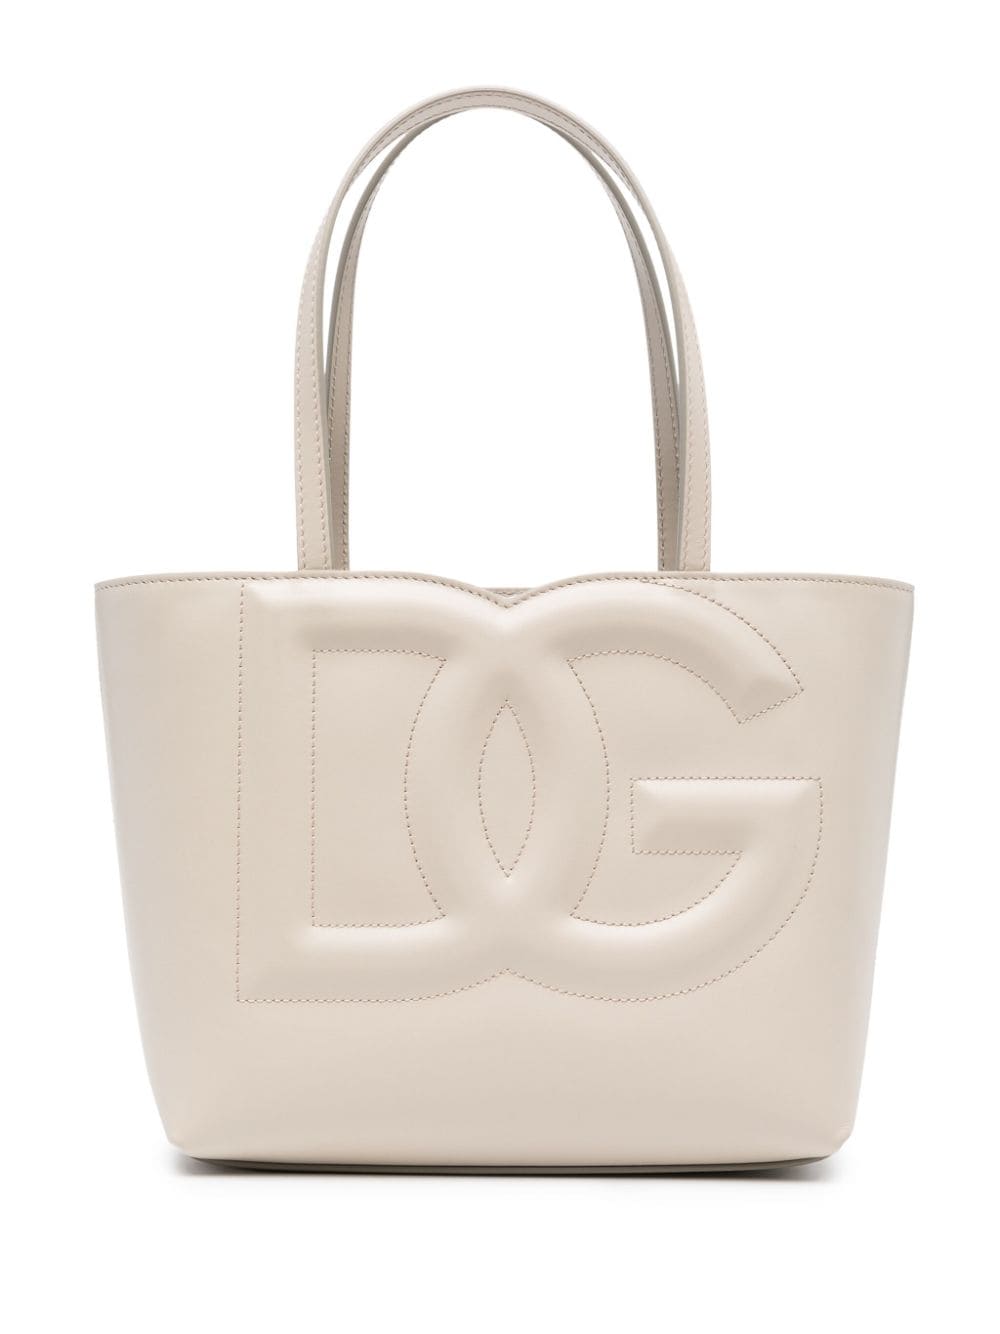 Tote bag with logo